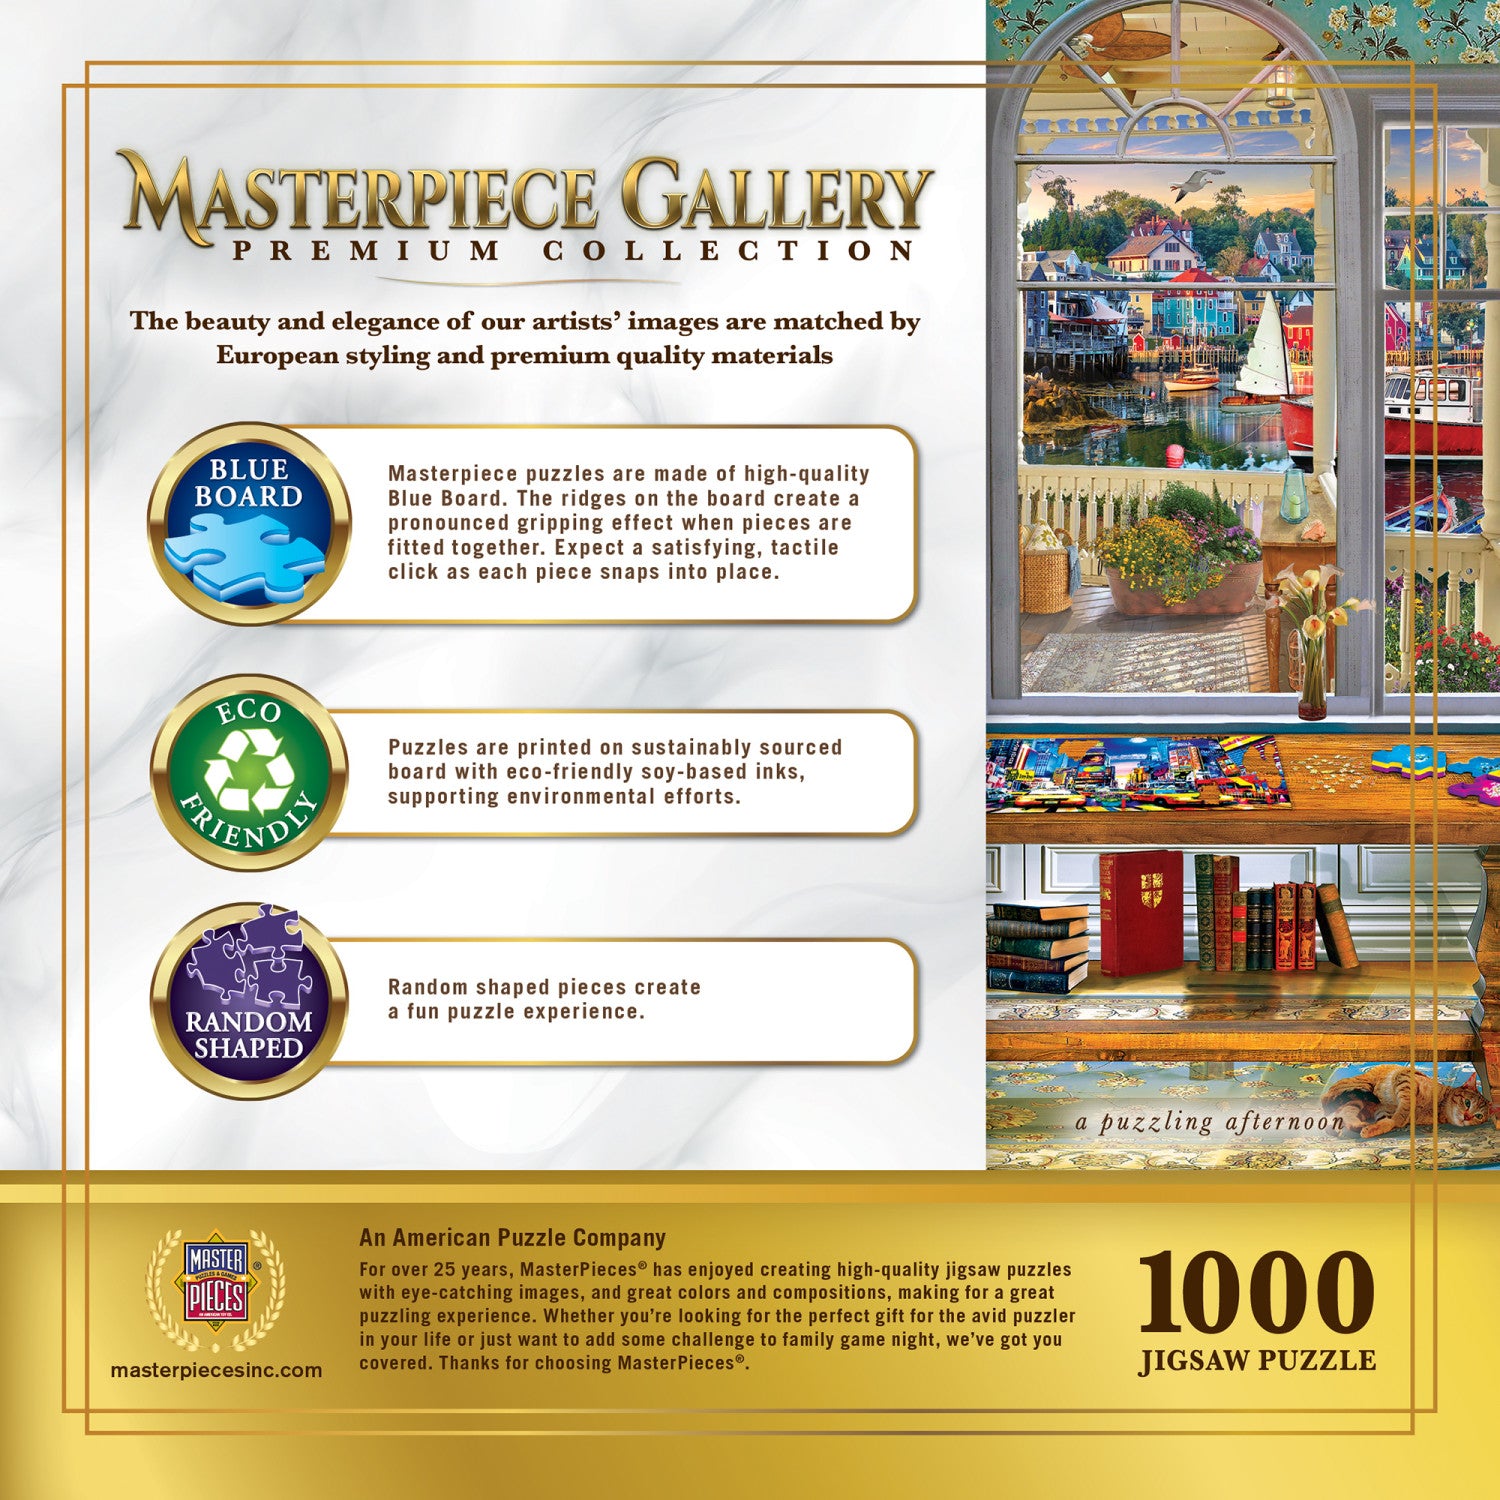 Masterpiece Gallery - A Puzzling Afternoon 1000 Piece Puzzle